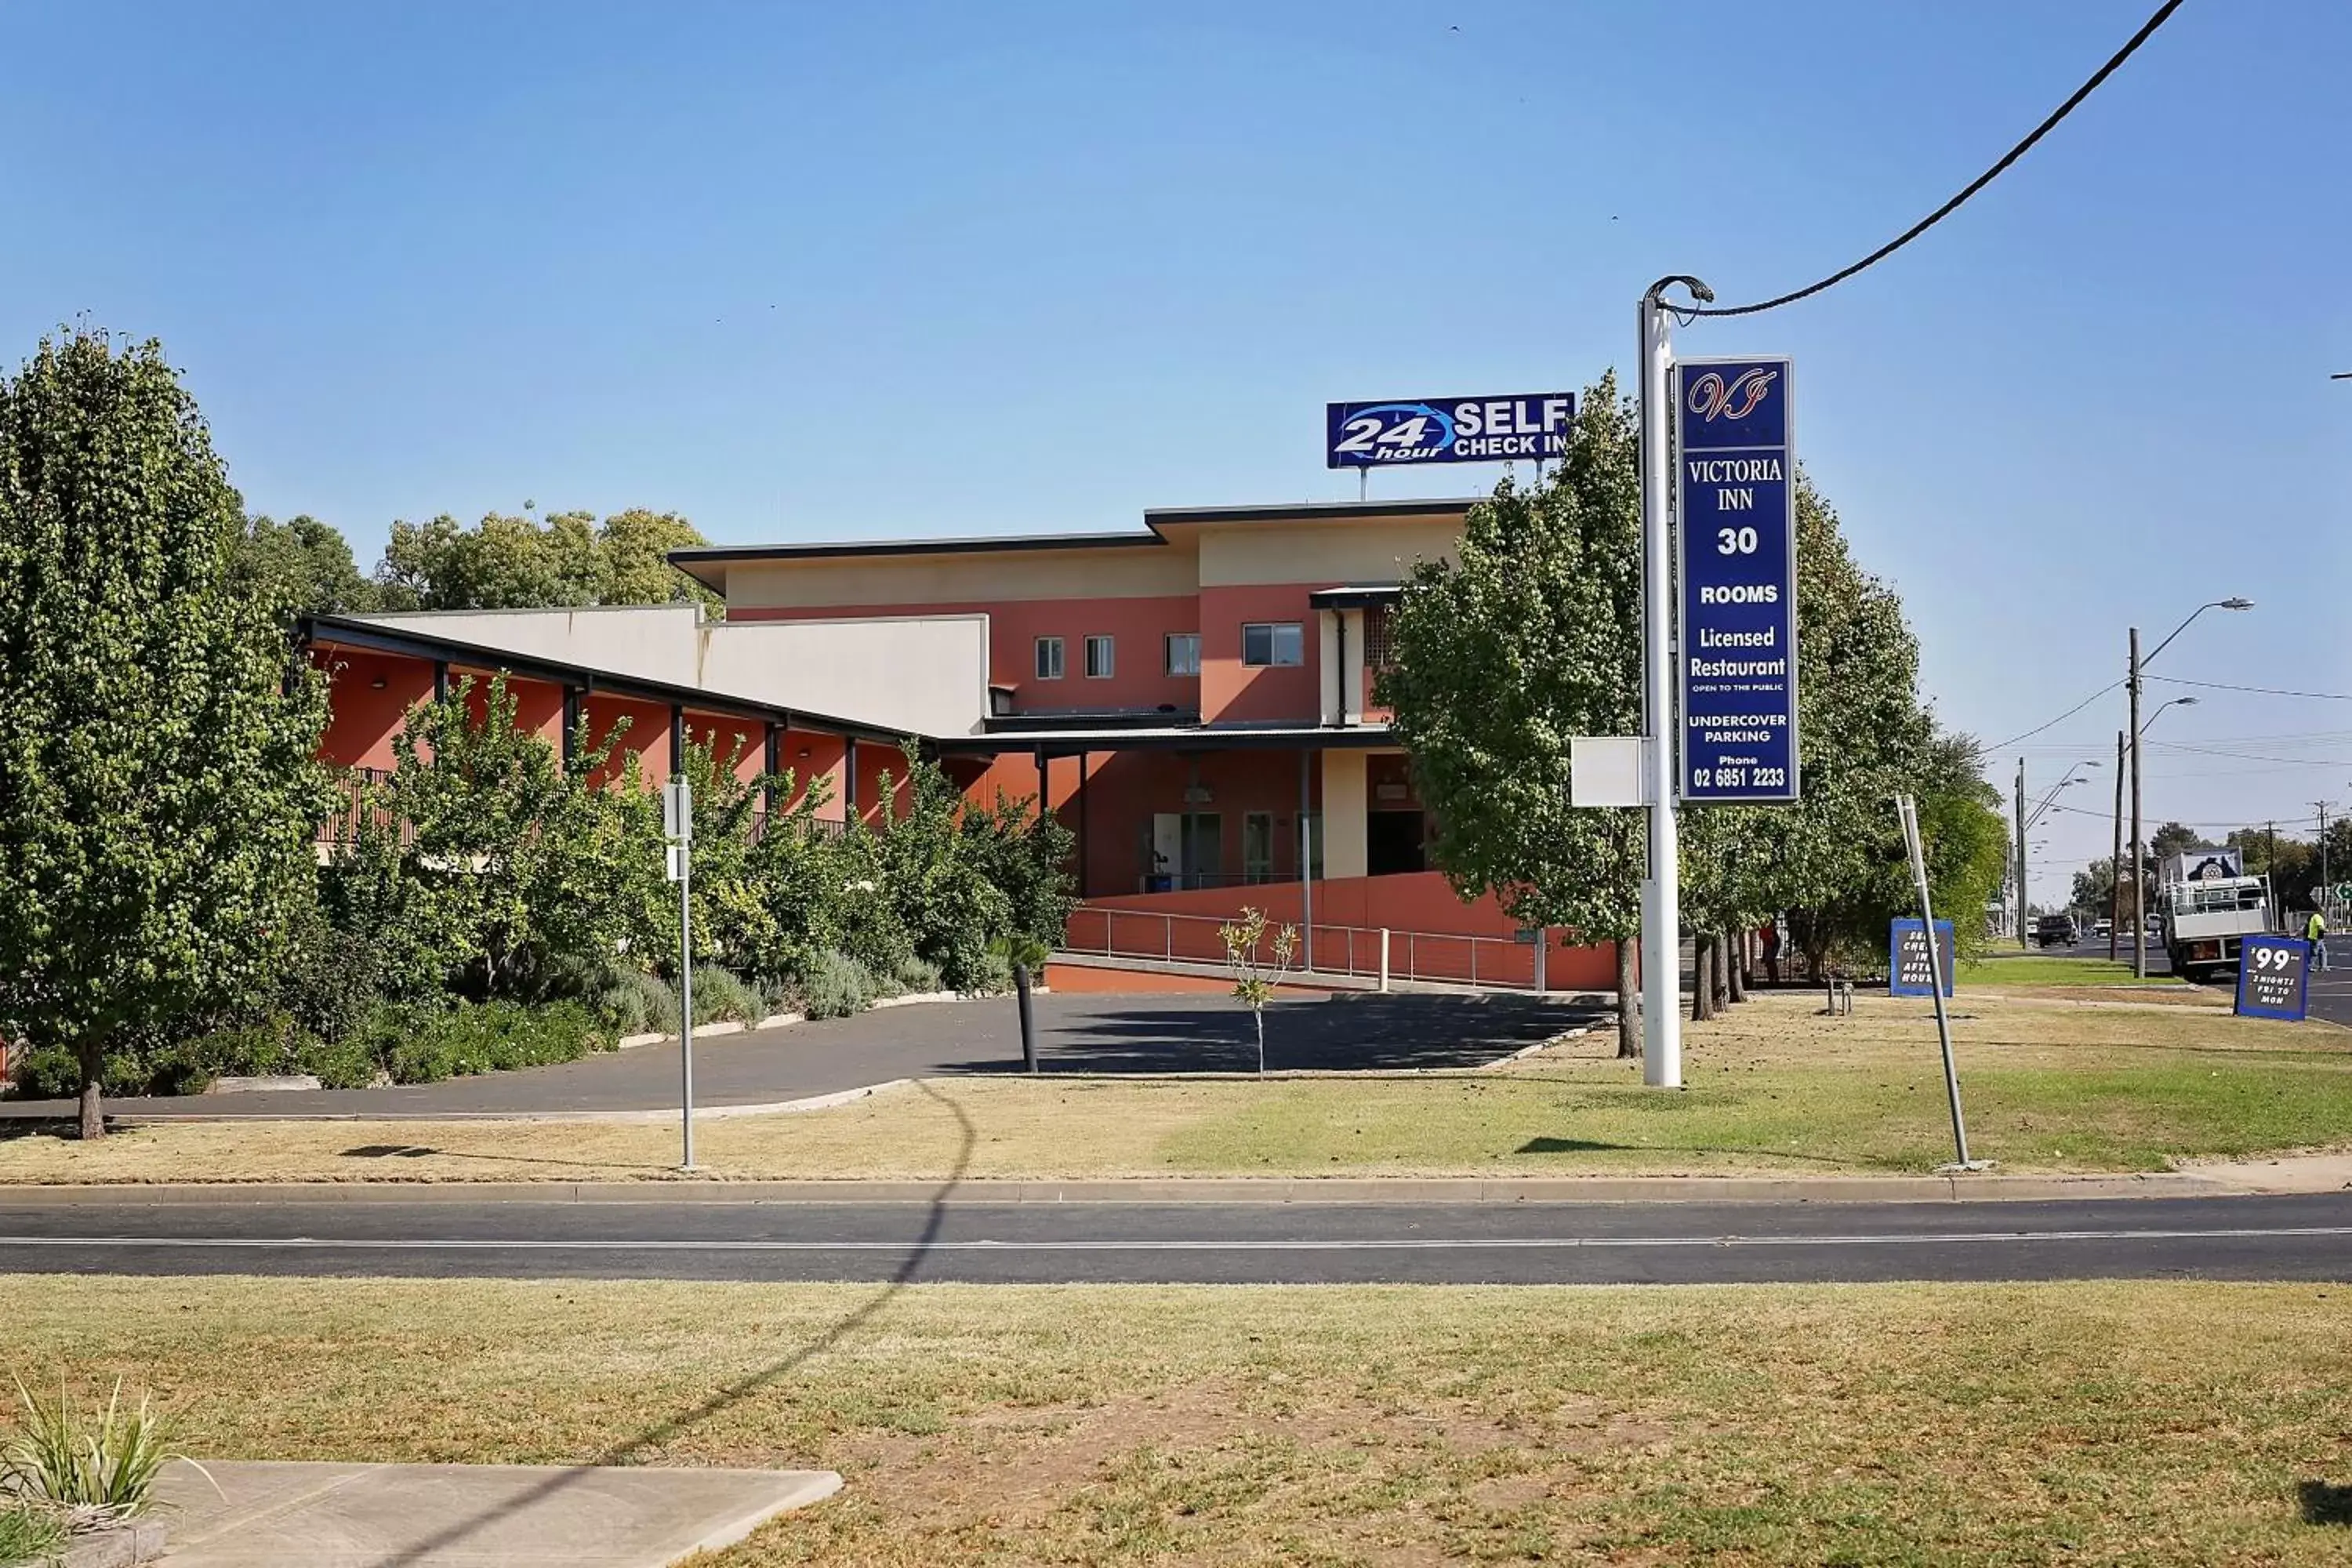 Property Building in Forbes Victoria Inn